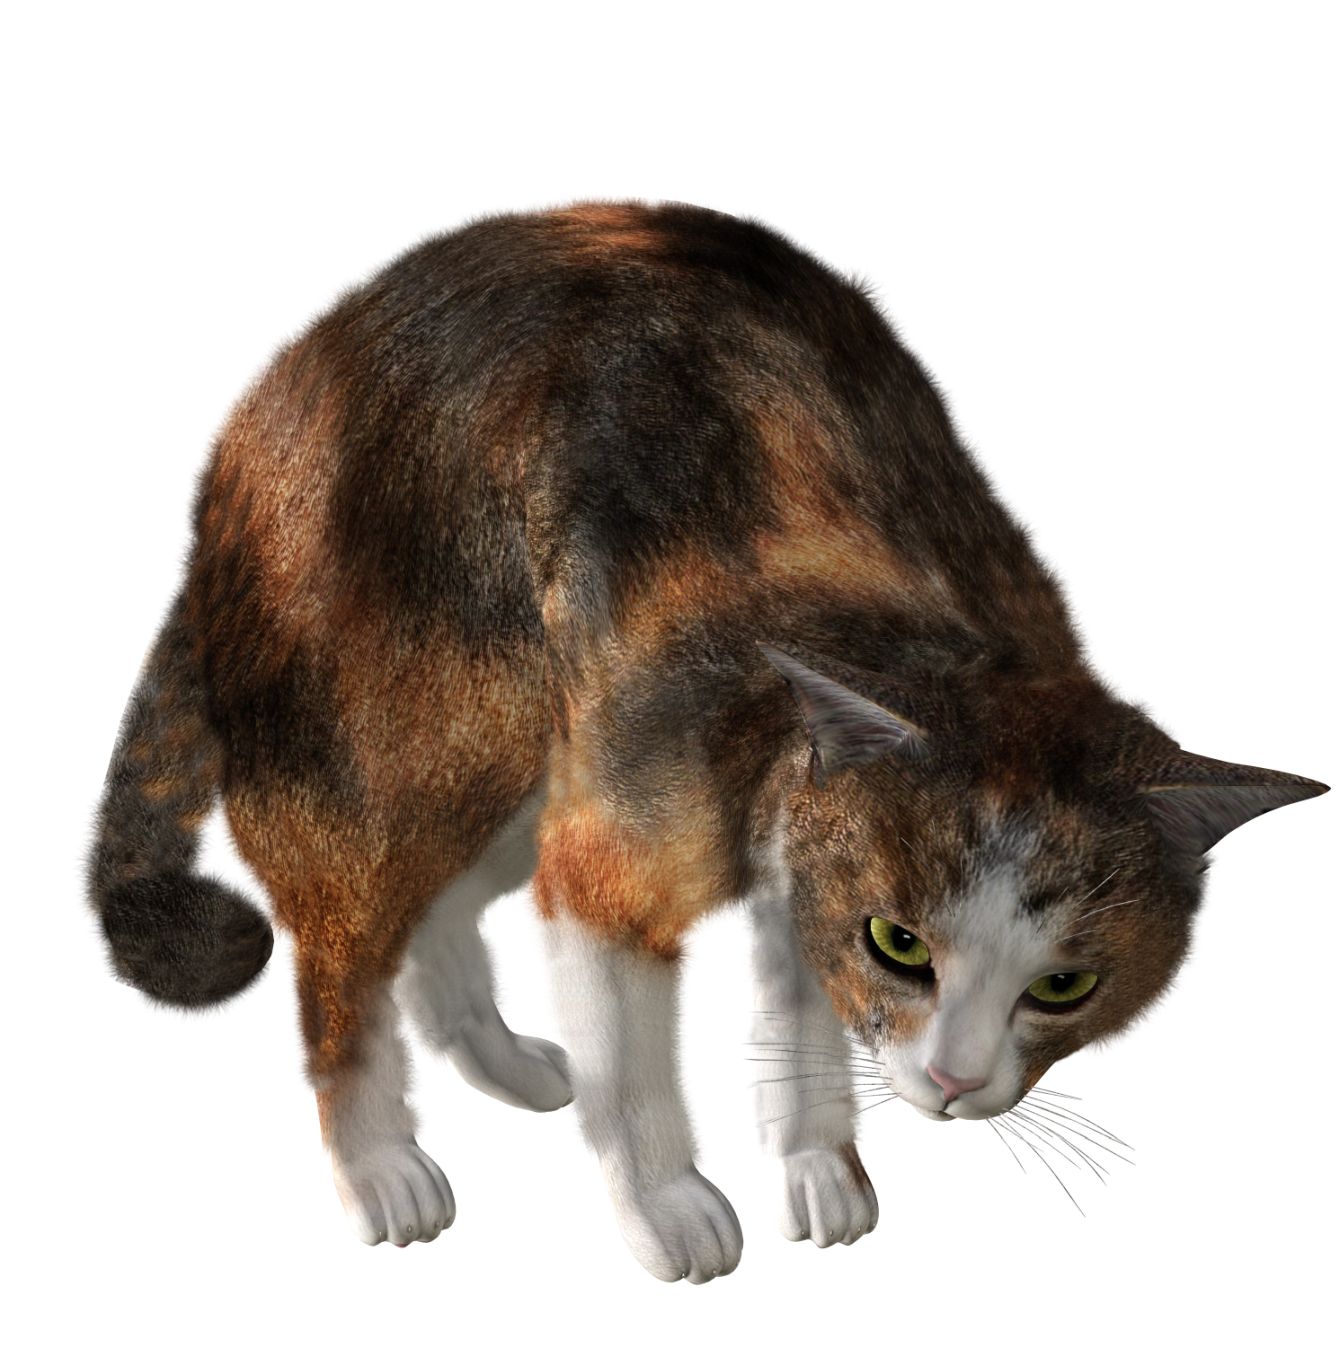 cat png image, free download picture, kitten    图片编号:95